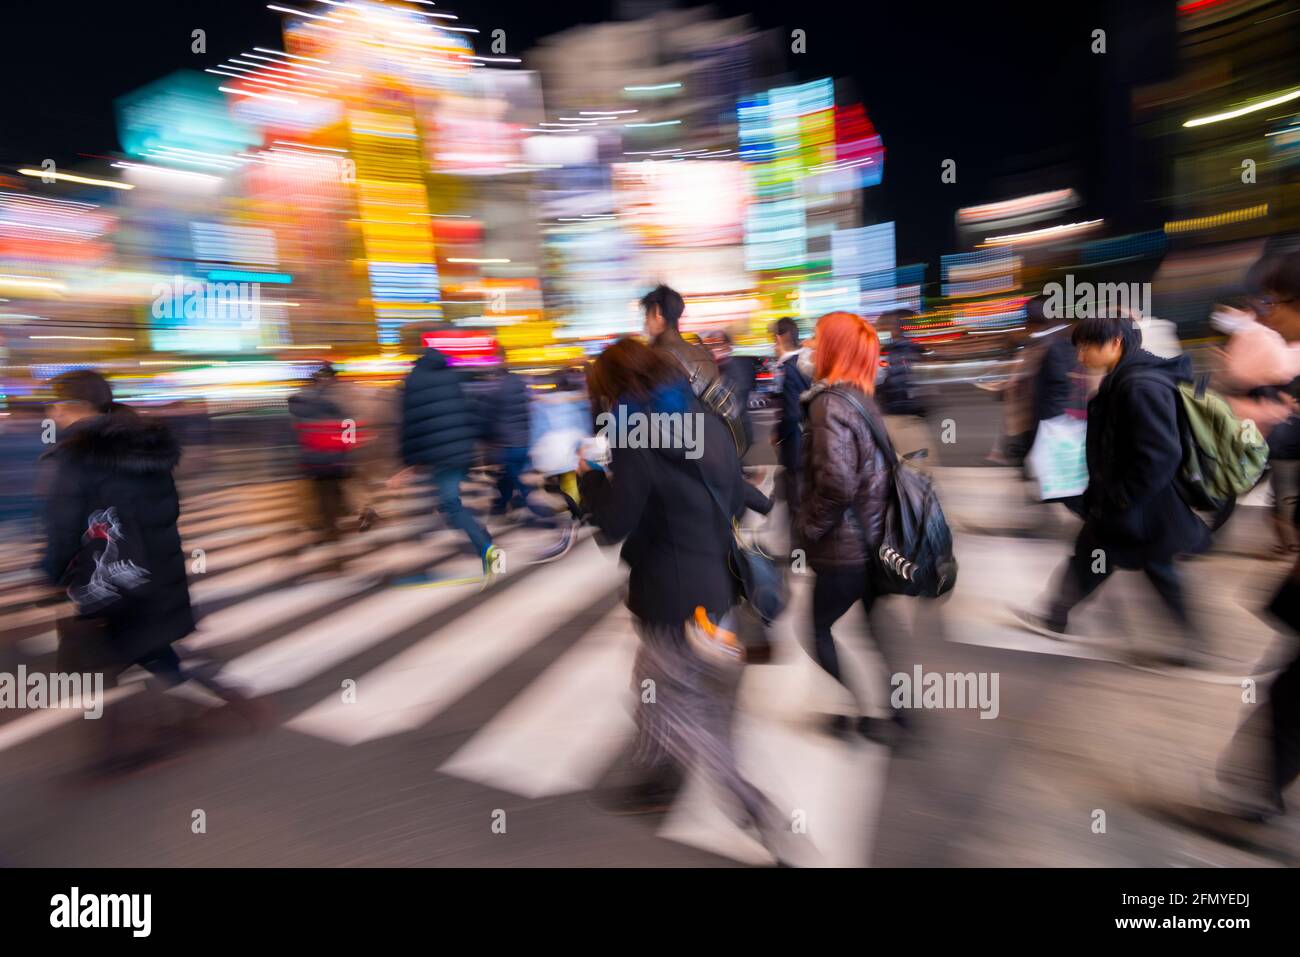 Tokyo, Japan - January 8, 2016:  Motion blur of people at a street crossing in the bustling district of Akihabara Electric Town. Stock Photo